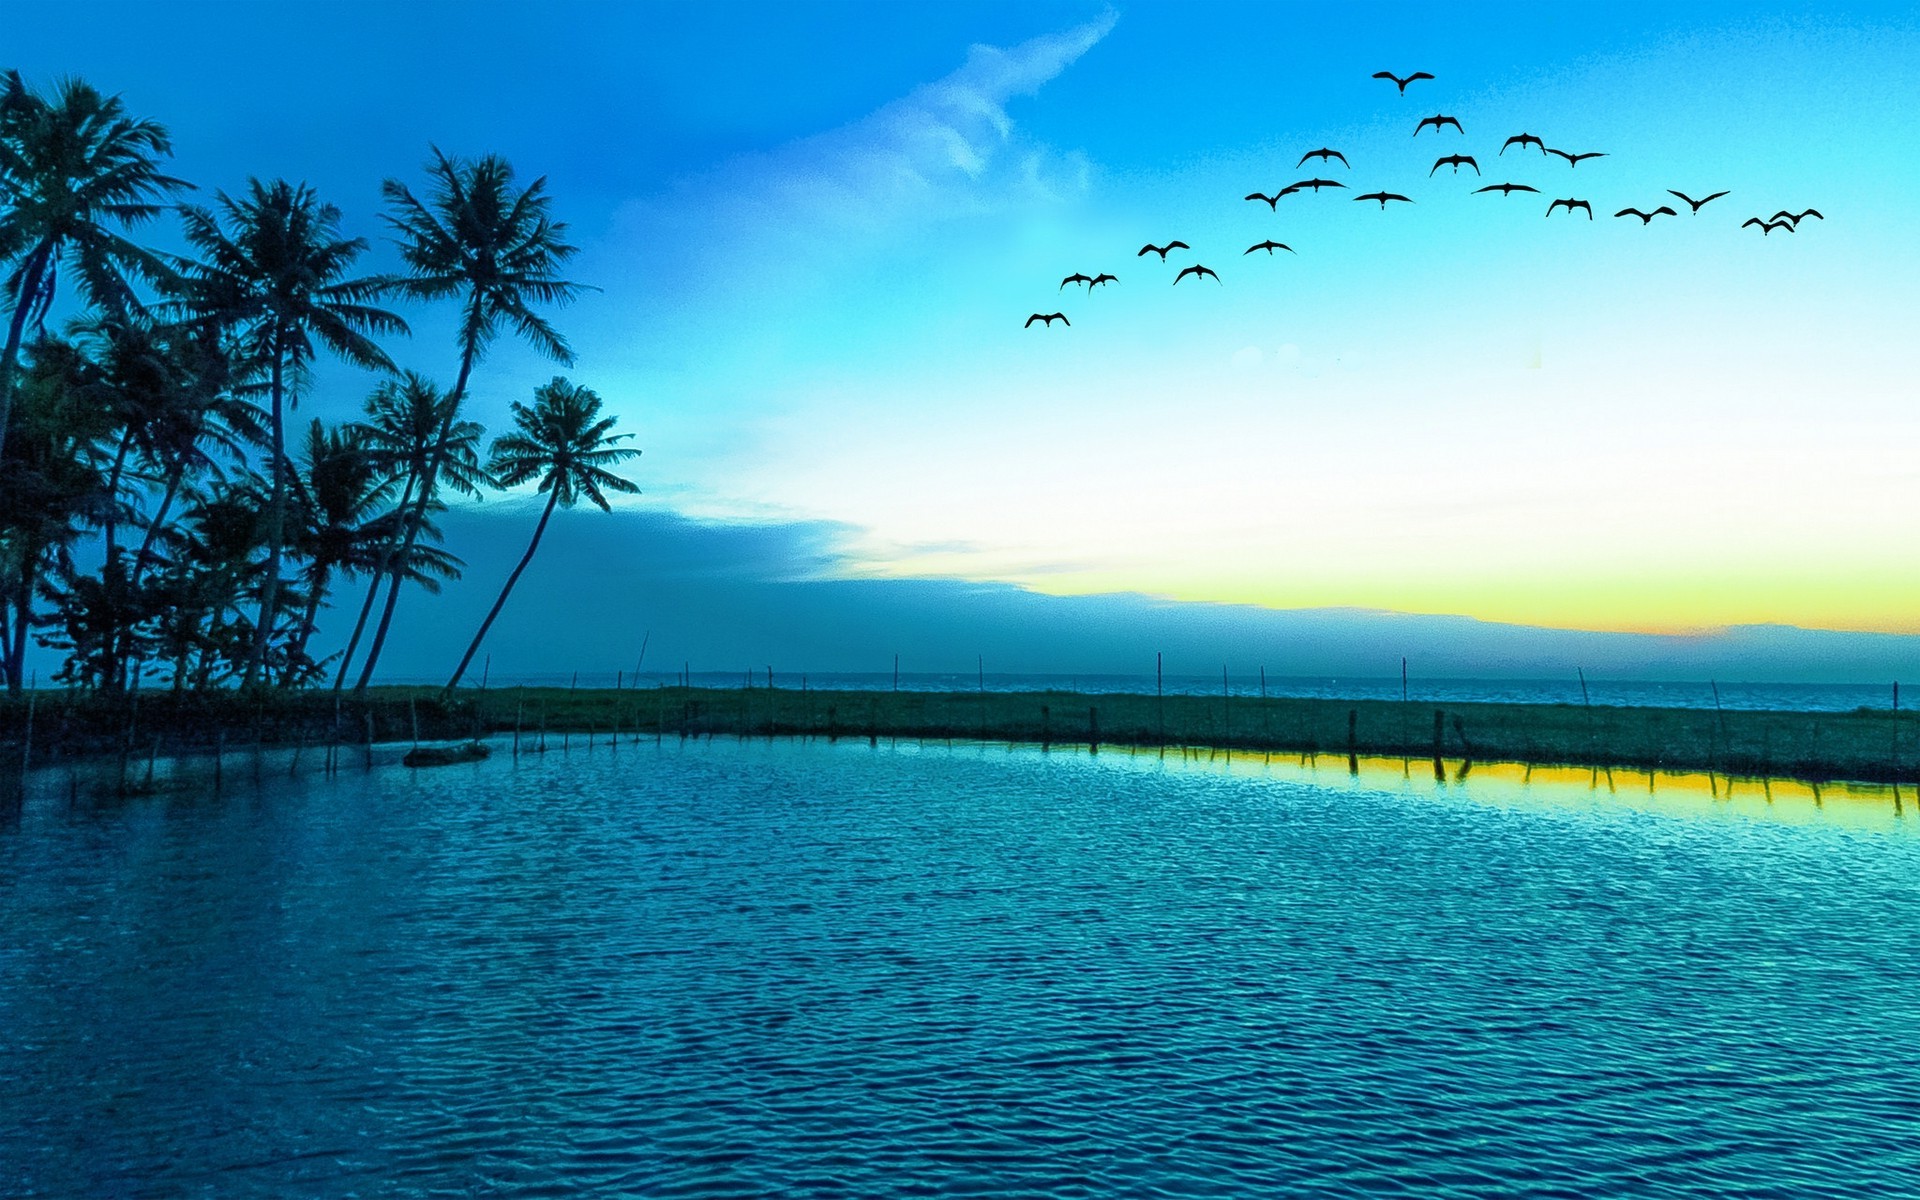 wallpaper with birds and trees,sky,blue,nature,natural landscape,water